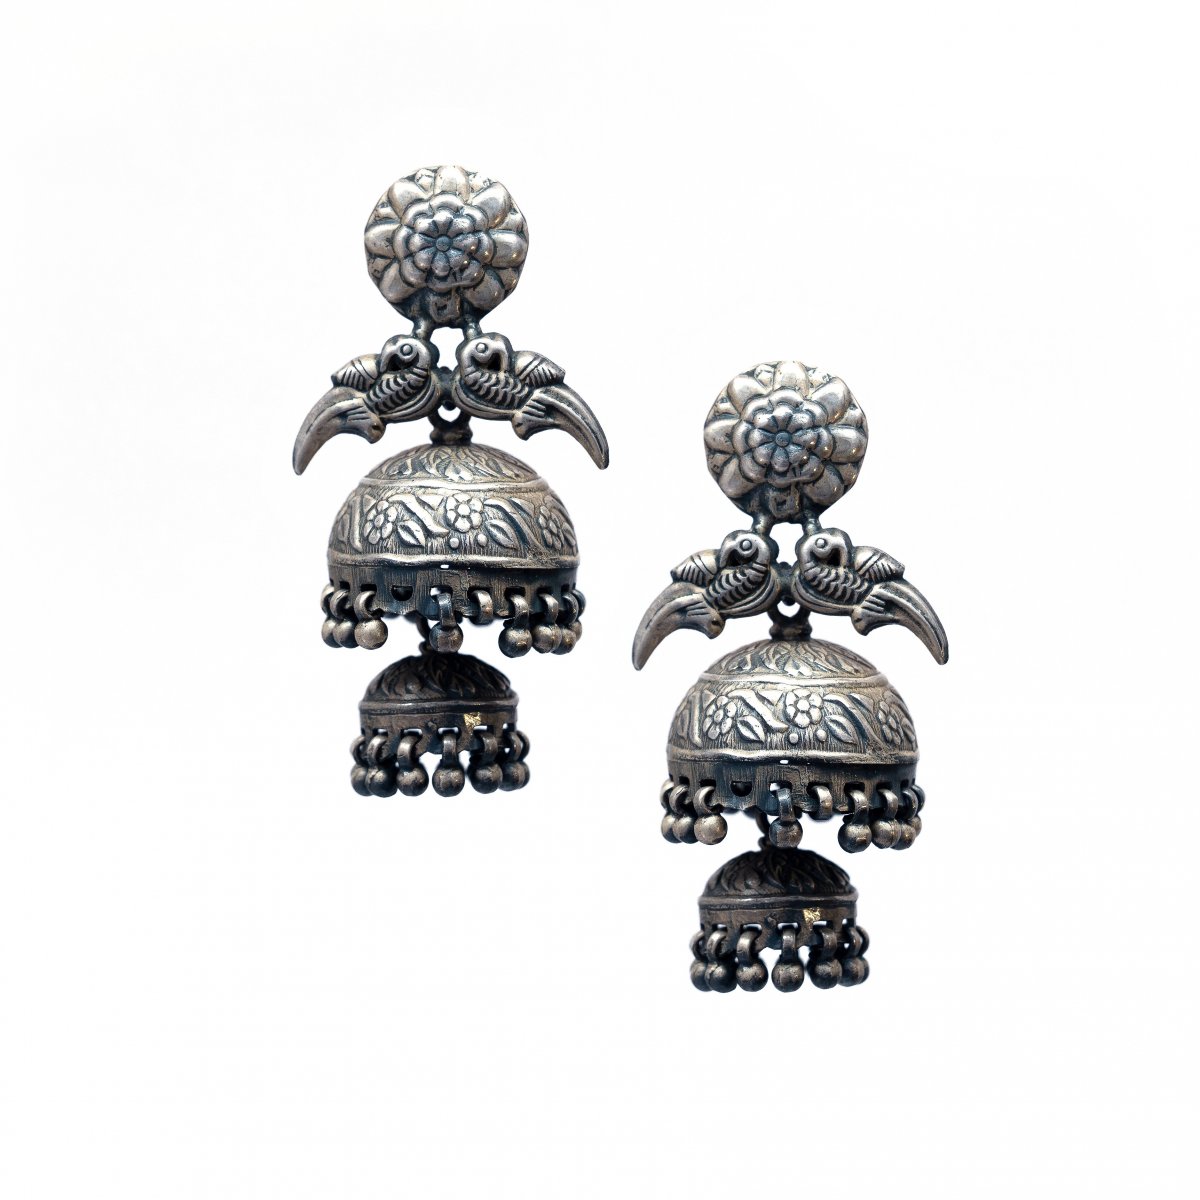 92.5 OXDIZED SILVER 2 TIER PARROT JHUMKAS